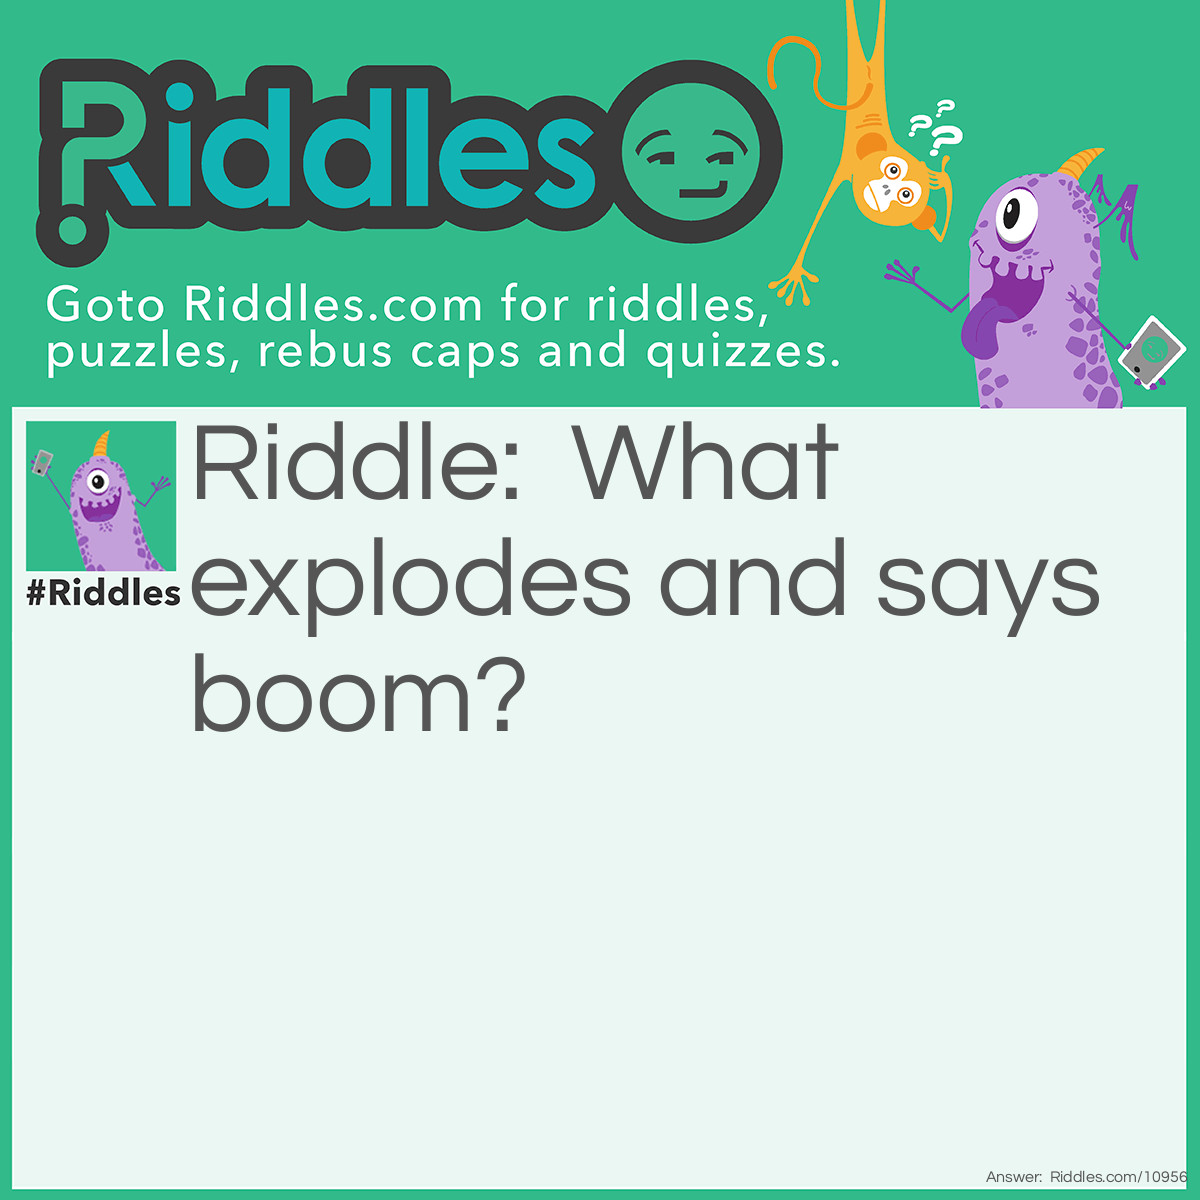 Riddle: What explodes and says boom? Answer: A bomb.